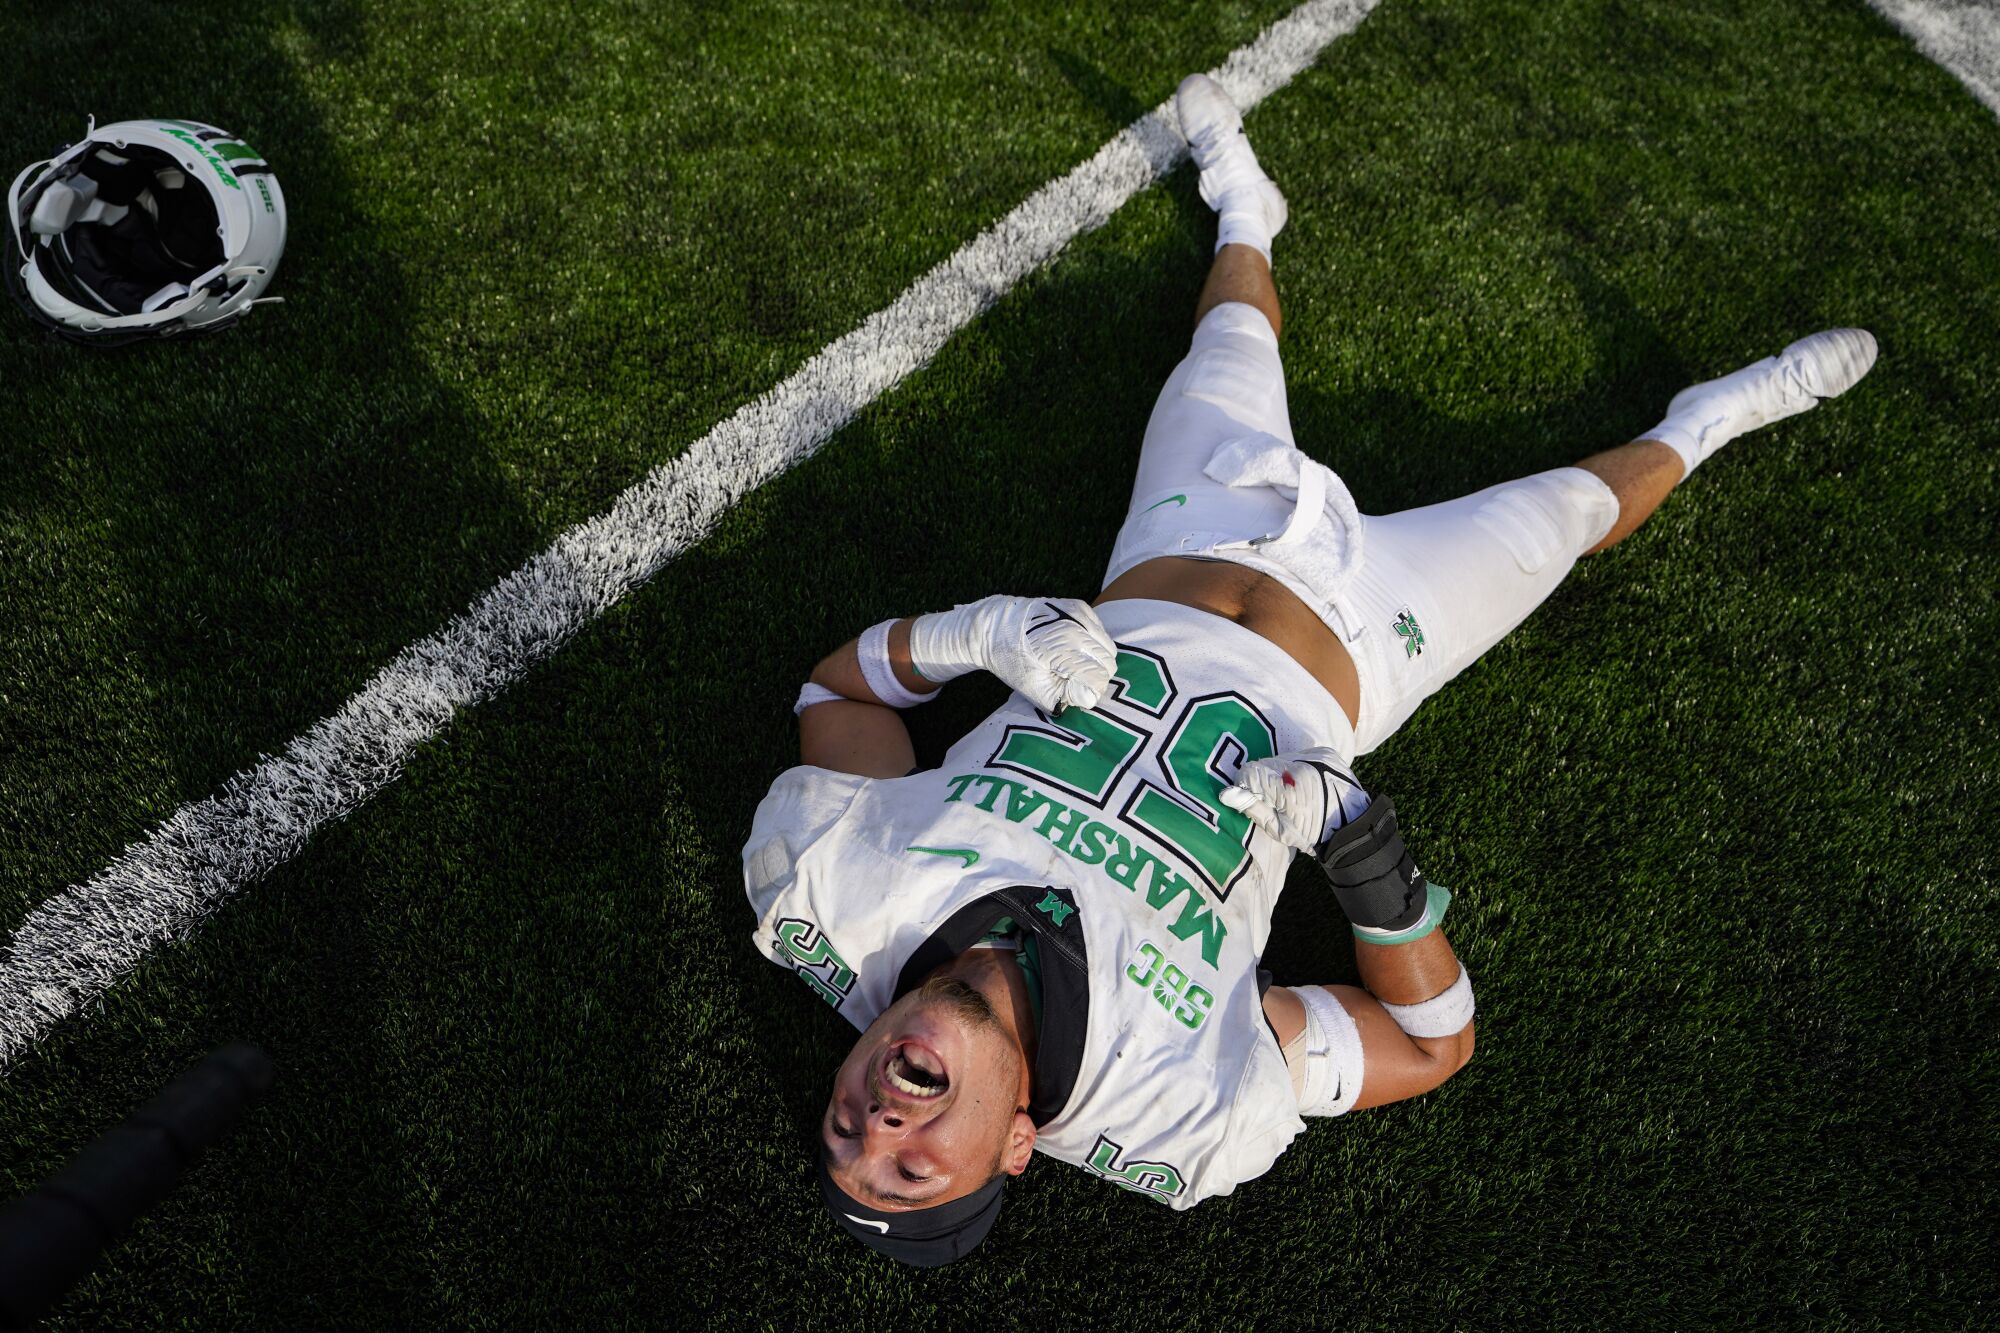 Marshall defensive lineman Owen Porter celebrates while laying down on a green field.